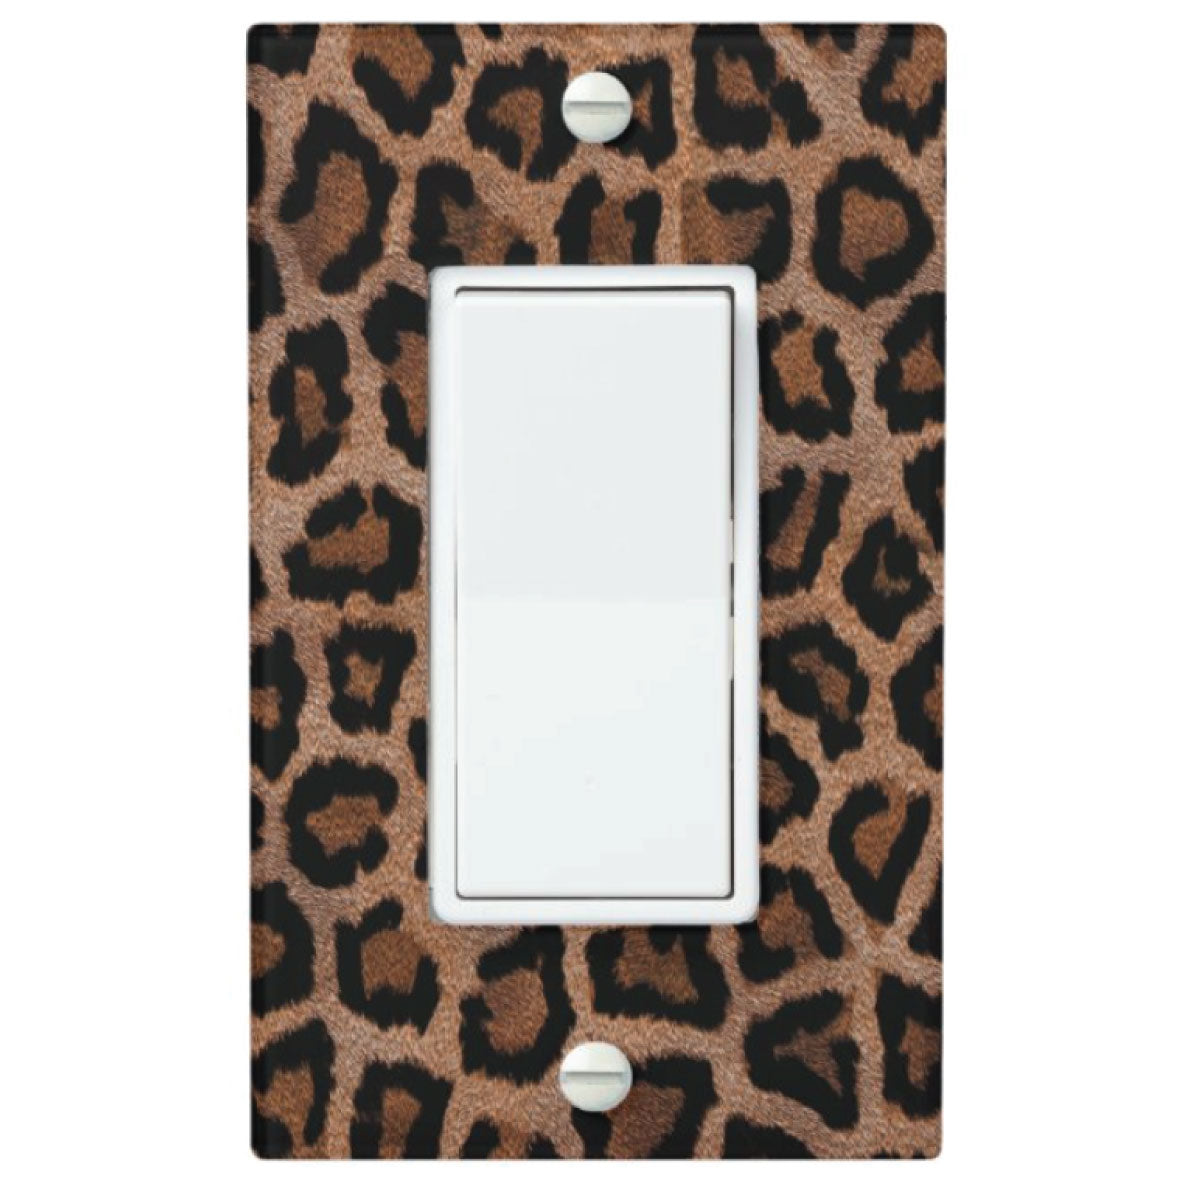 Leopard Print Design, Single Gang Rocker Decorator Dimmer Wall Plate, Brown, 2.94 x 4.69 inches